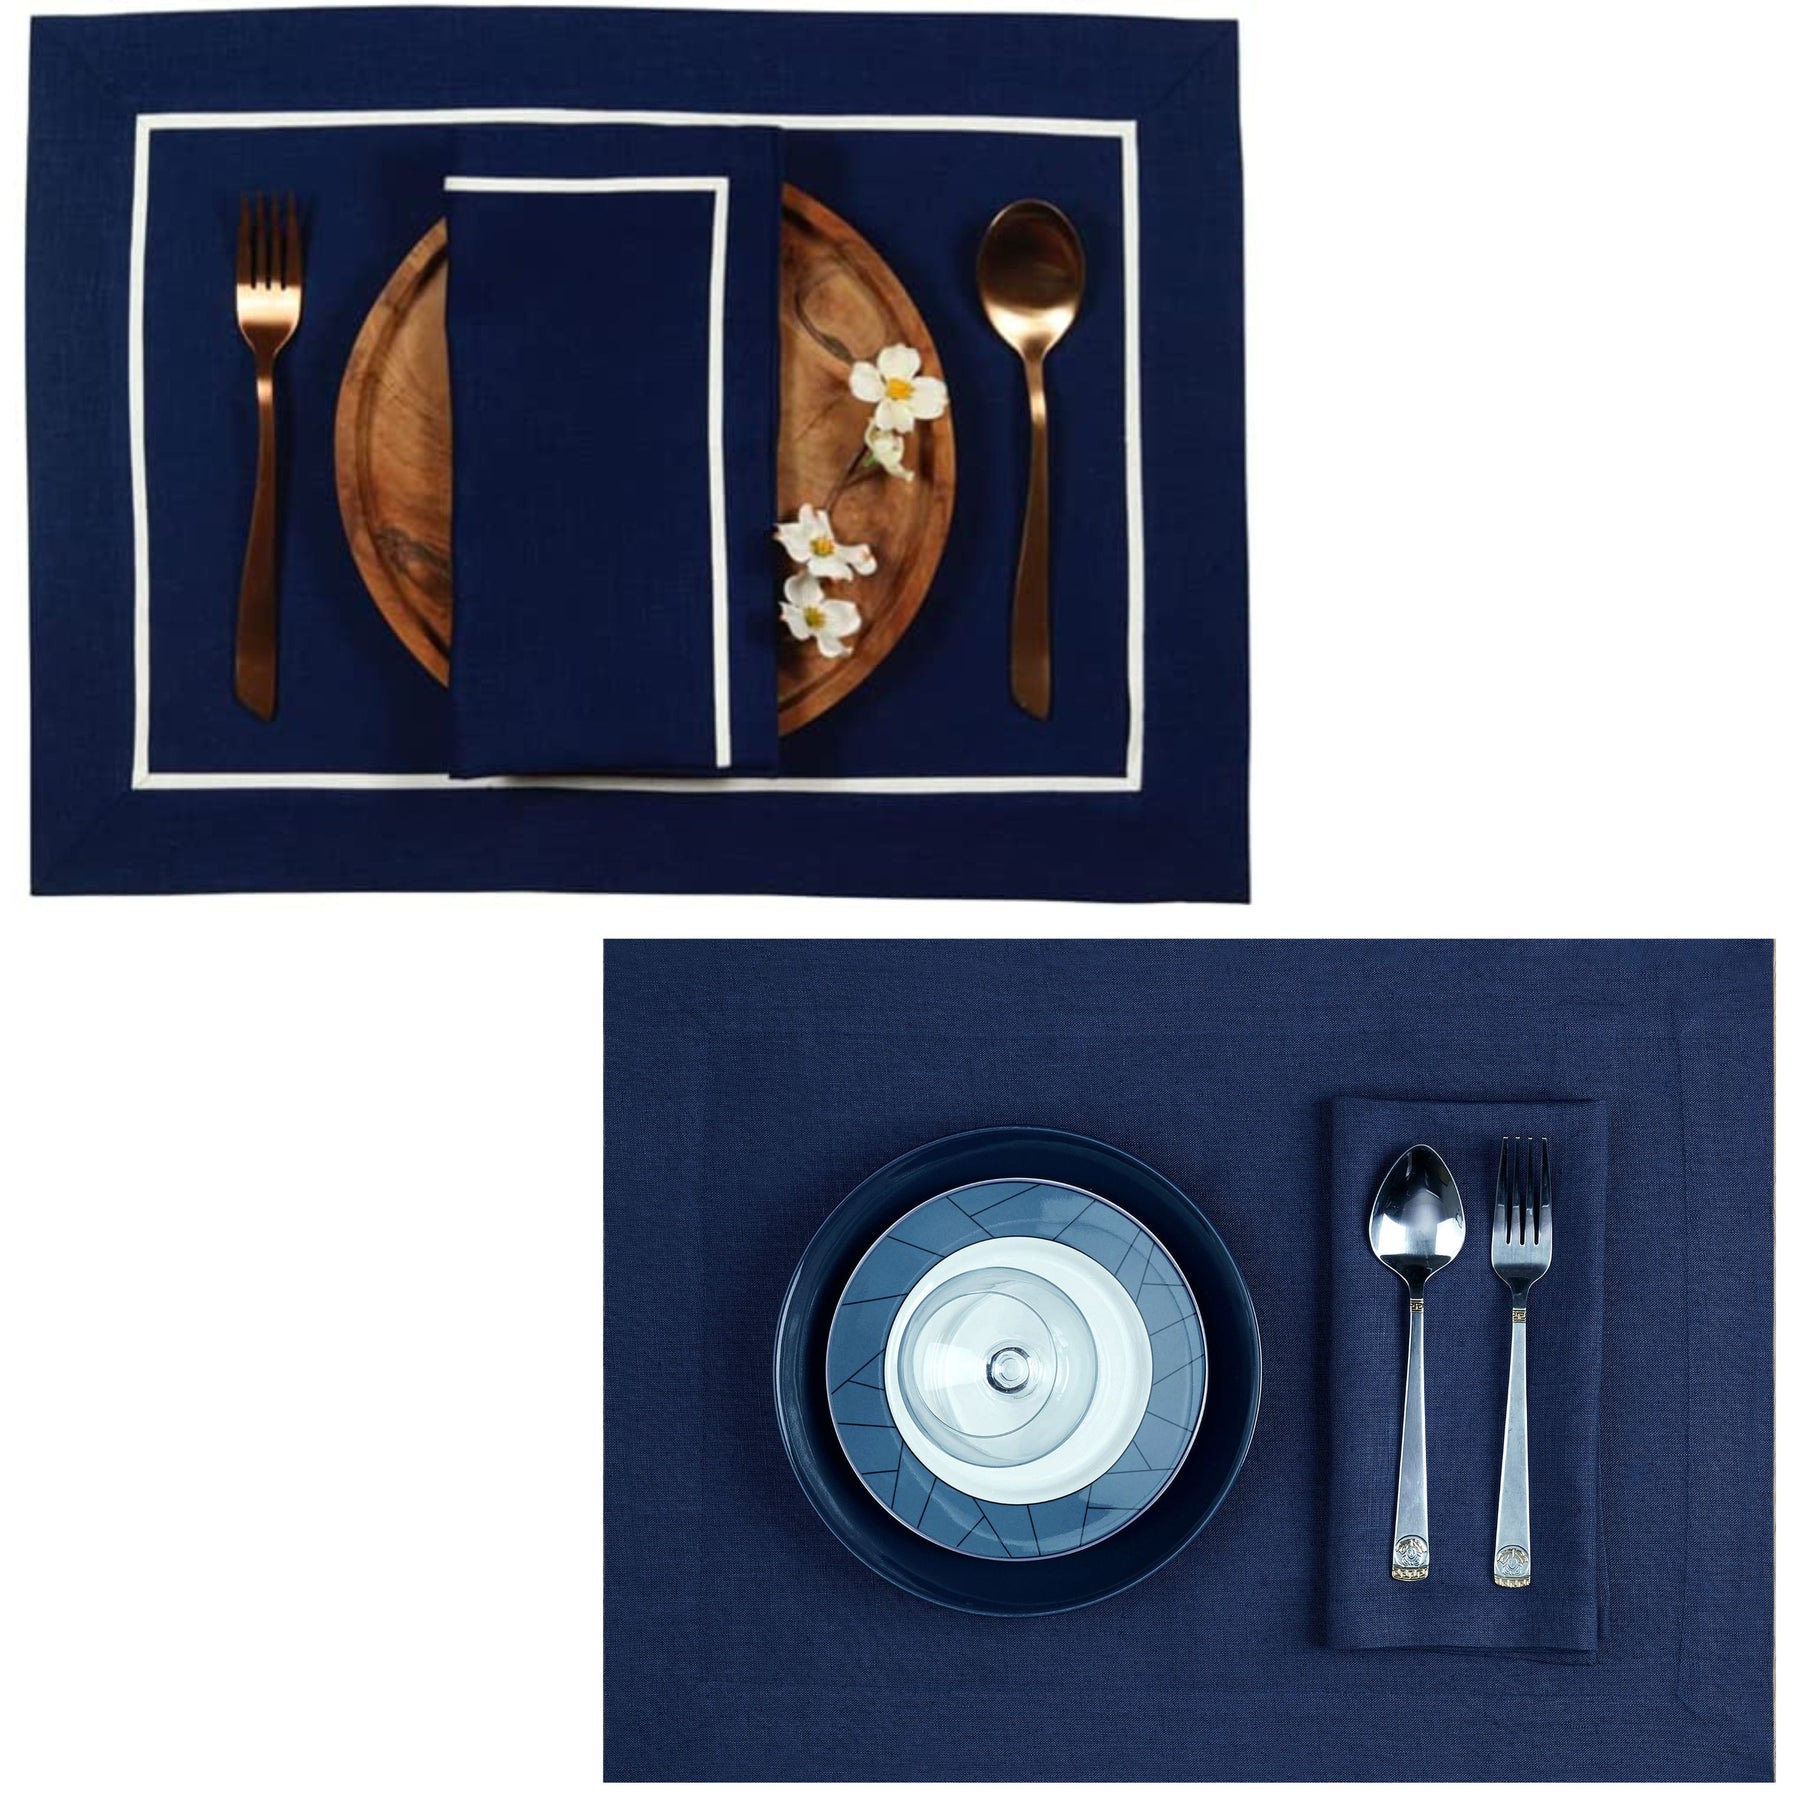 Navy Blue & White Linen Placemats 14 x 19 Inch Set of 4 - Reversible